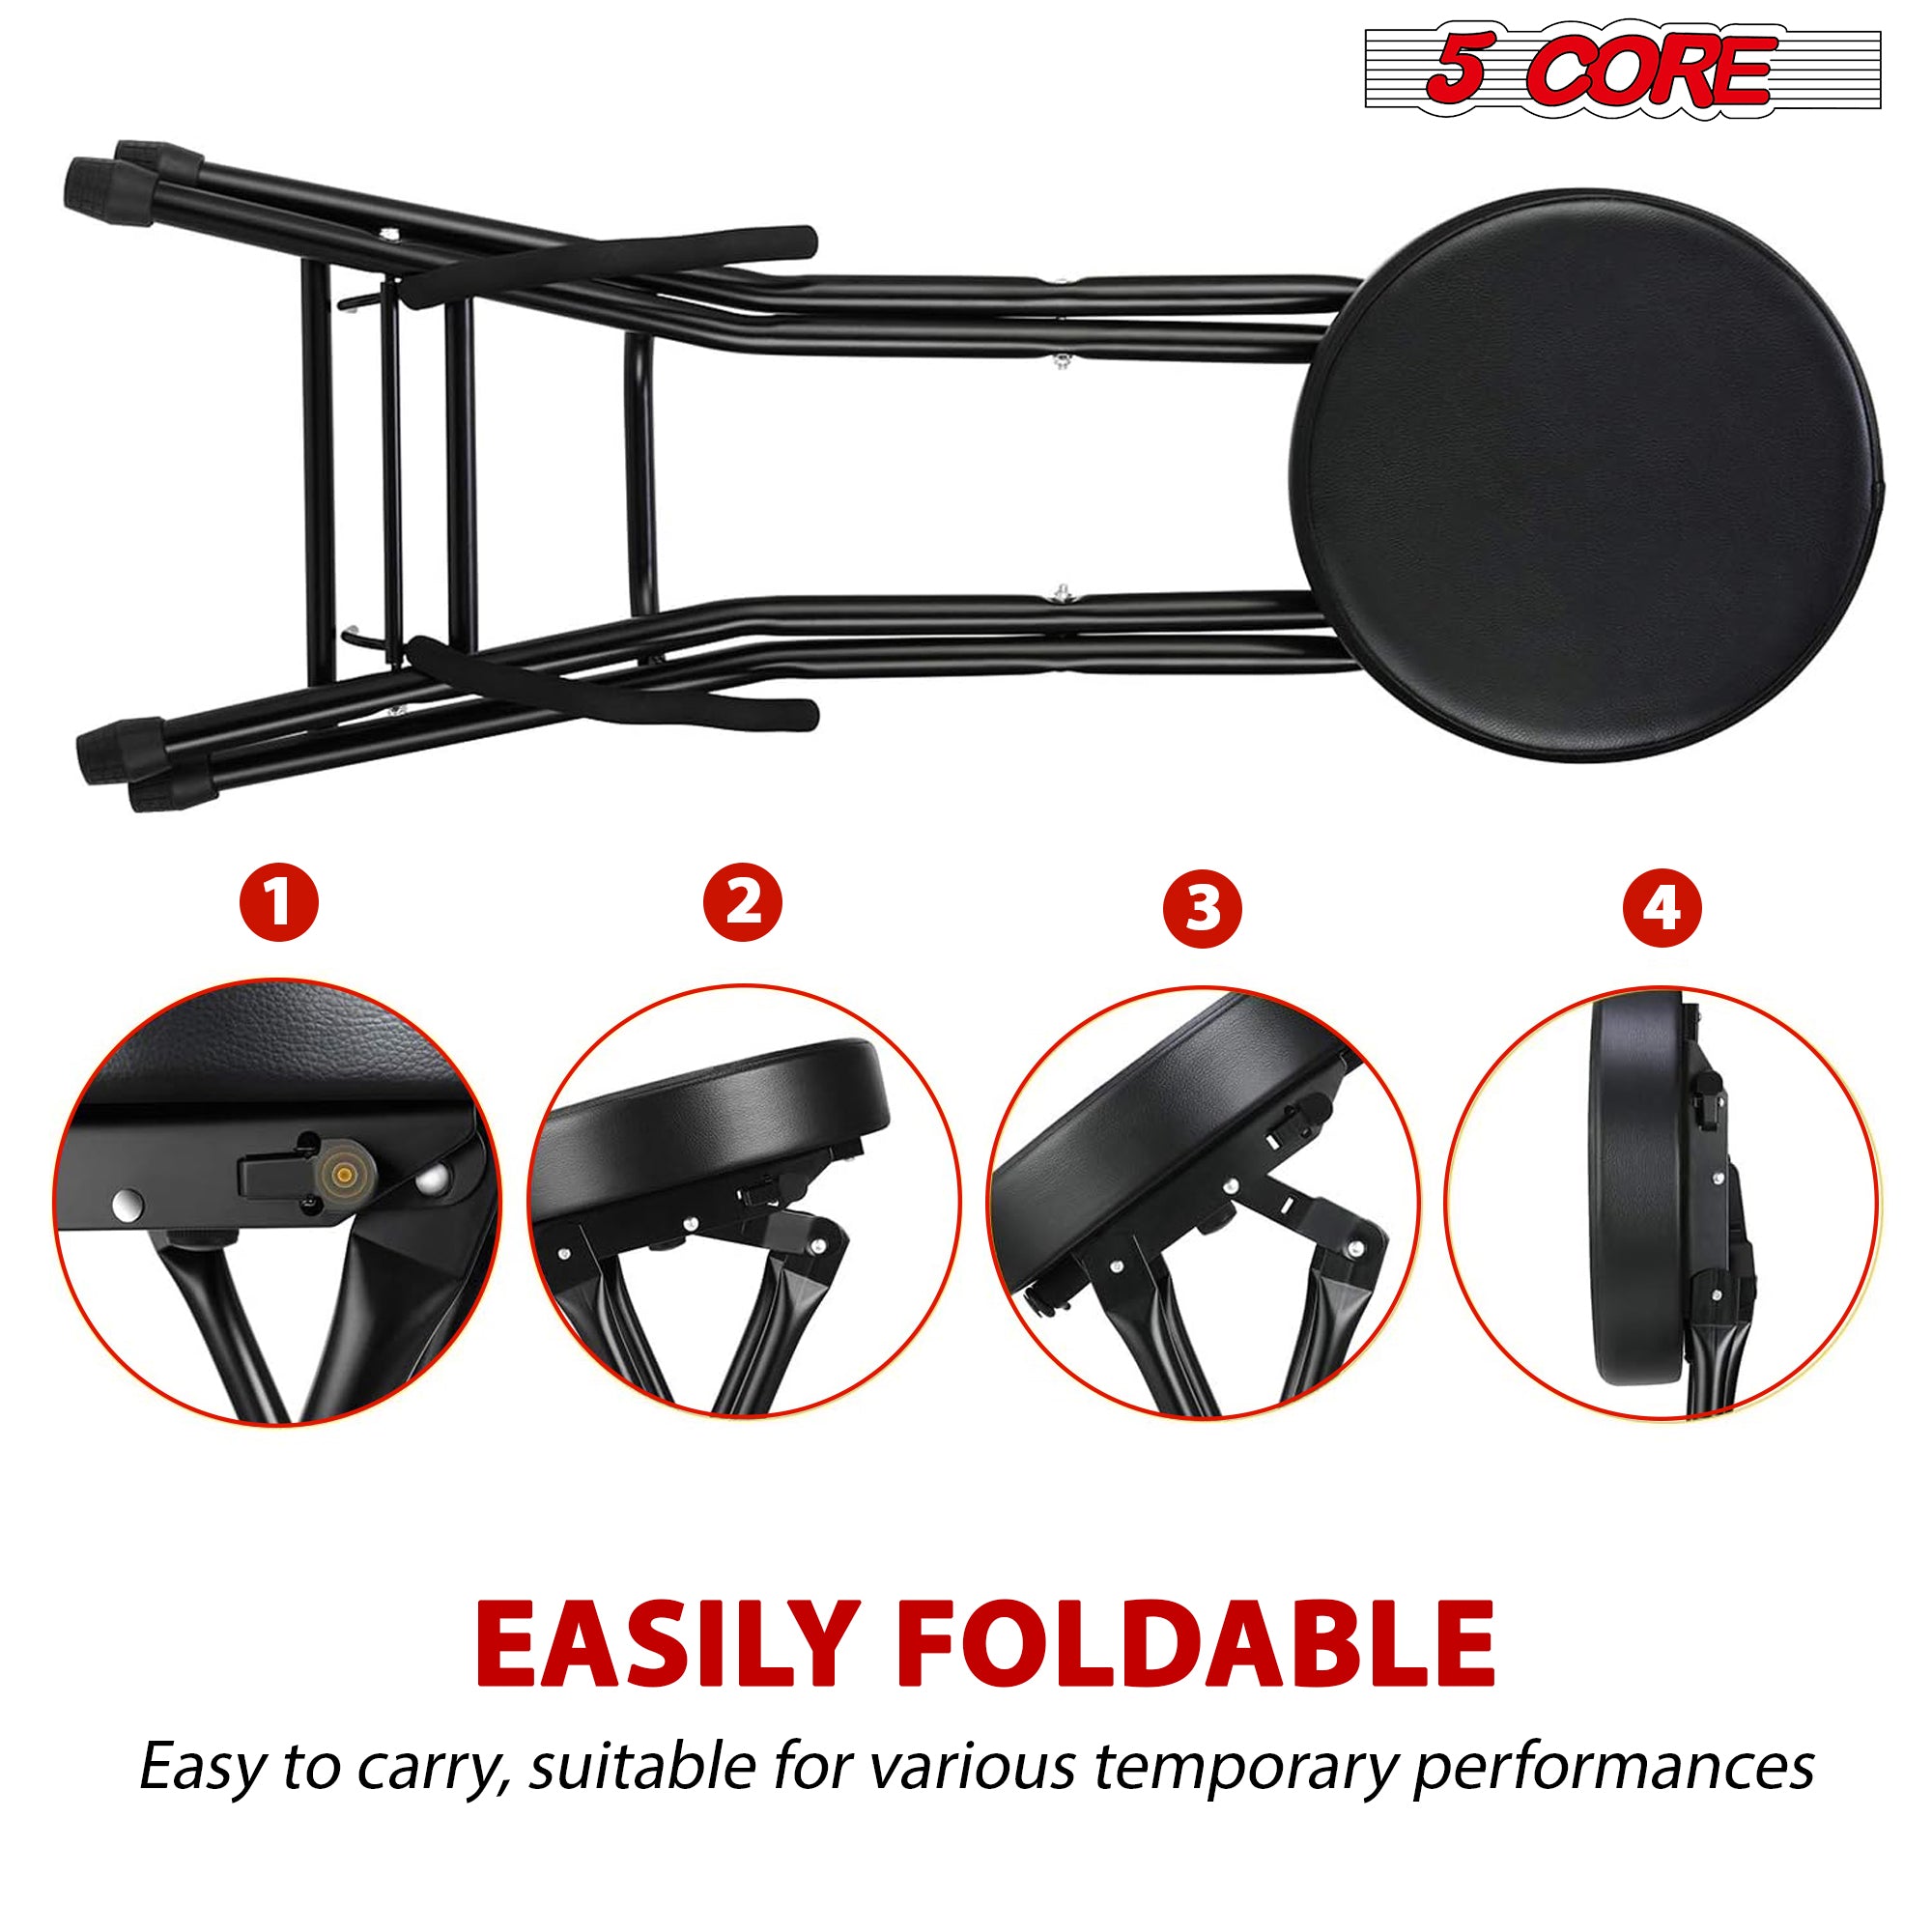 5 Core Guitar Stool: Comfortable Seating for Musicians